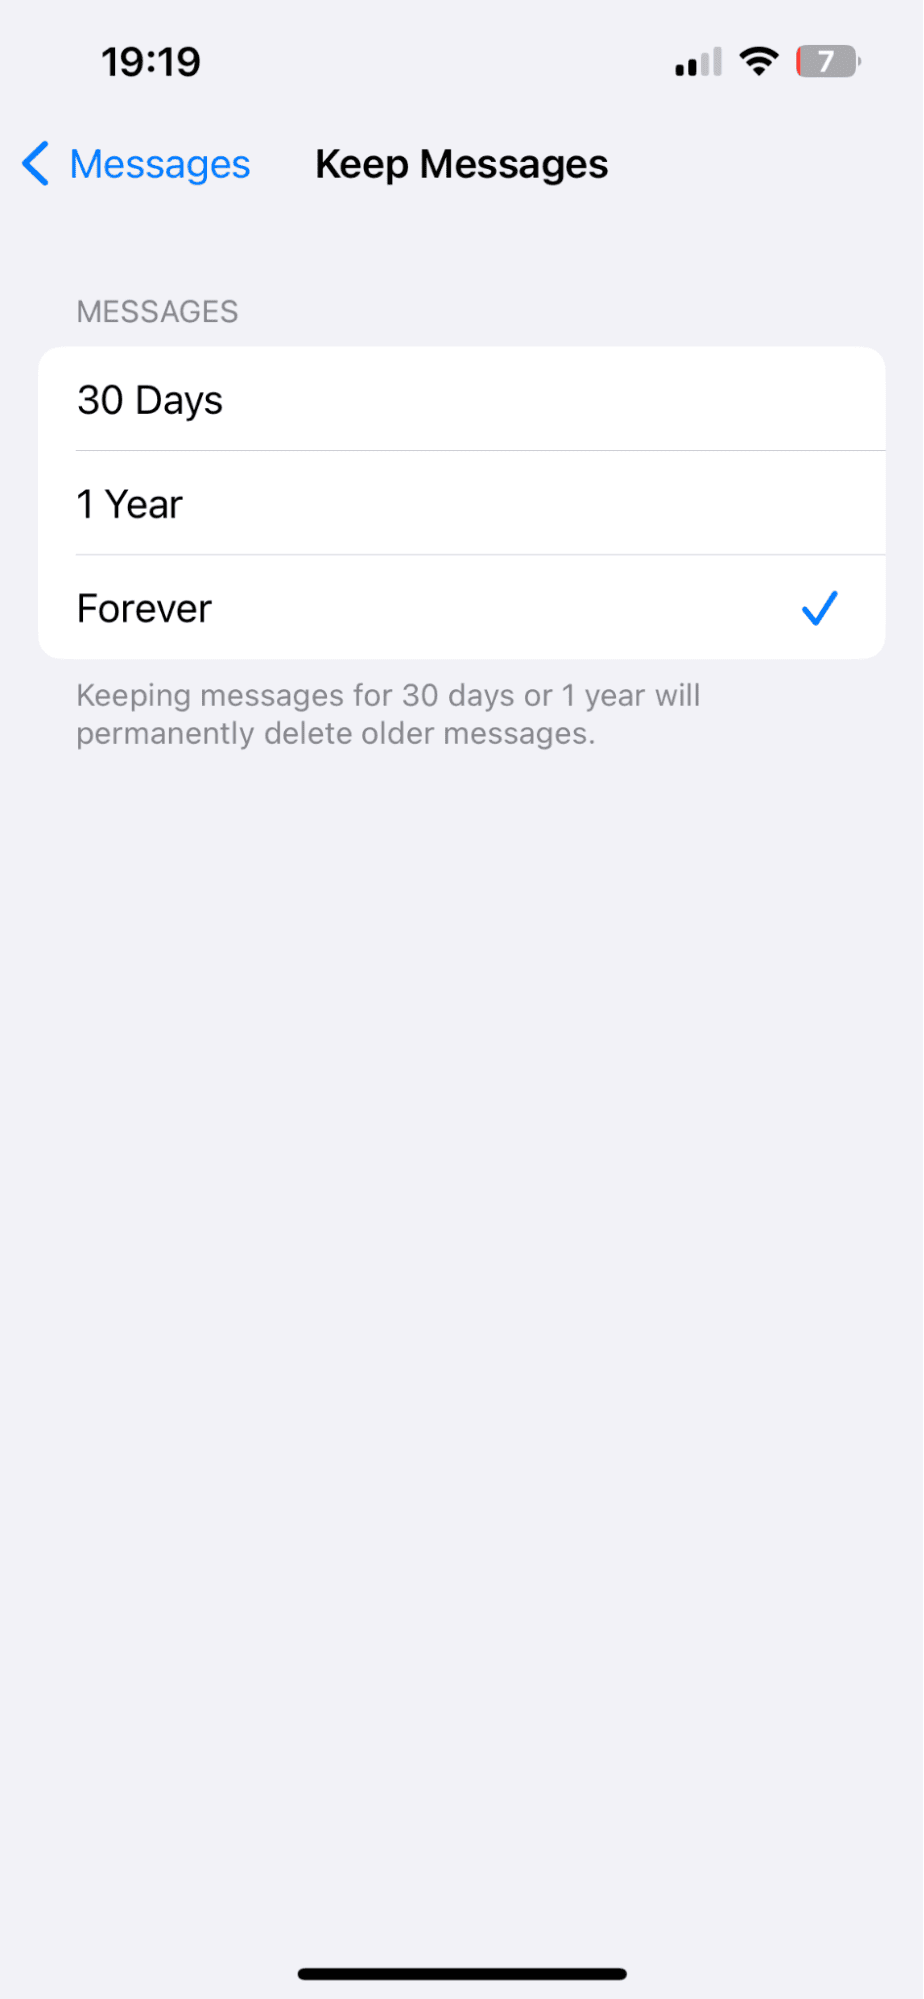 How to manage Messages on iPhone